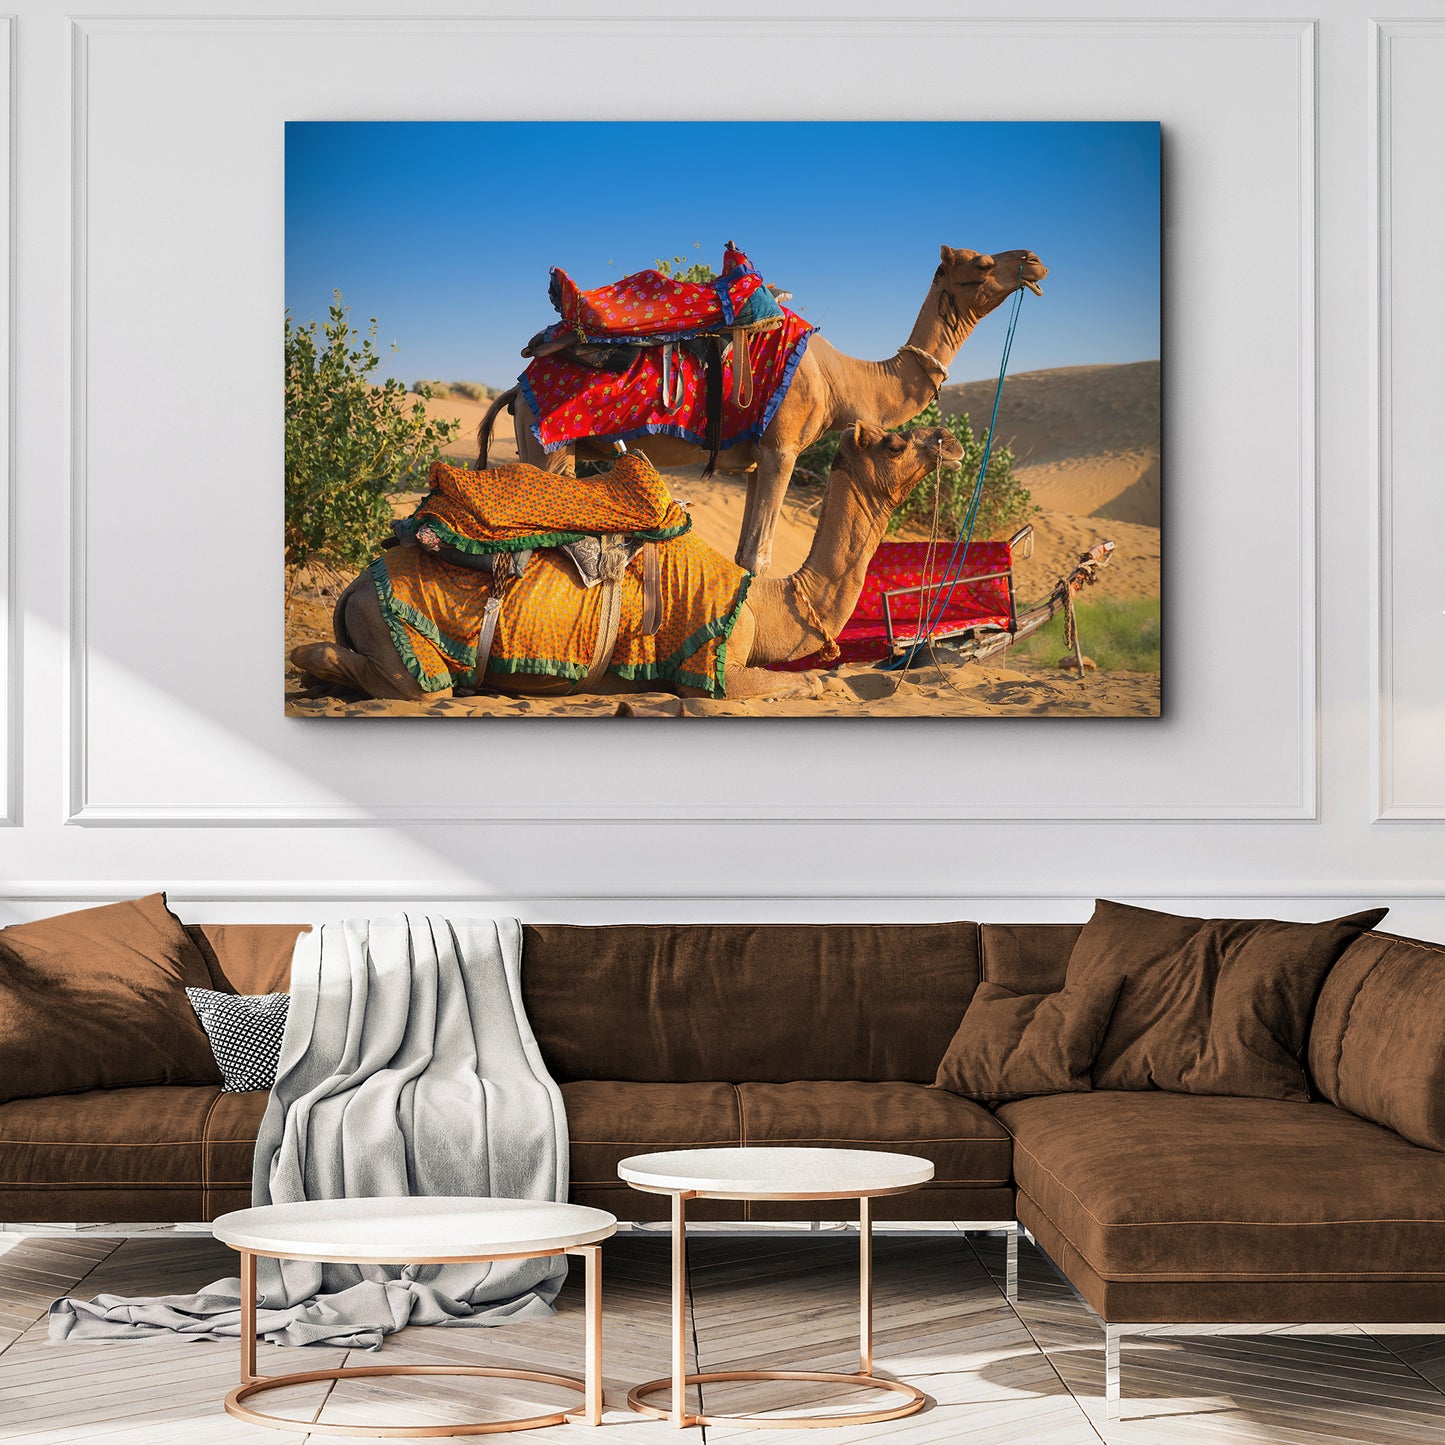 Camel Ride Canvas Wall Art Style 2 - Image by Tailored Canvases